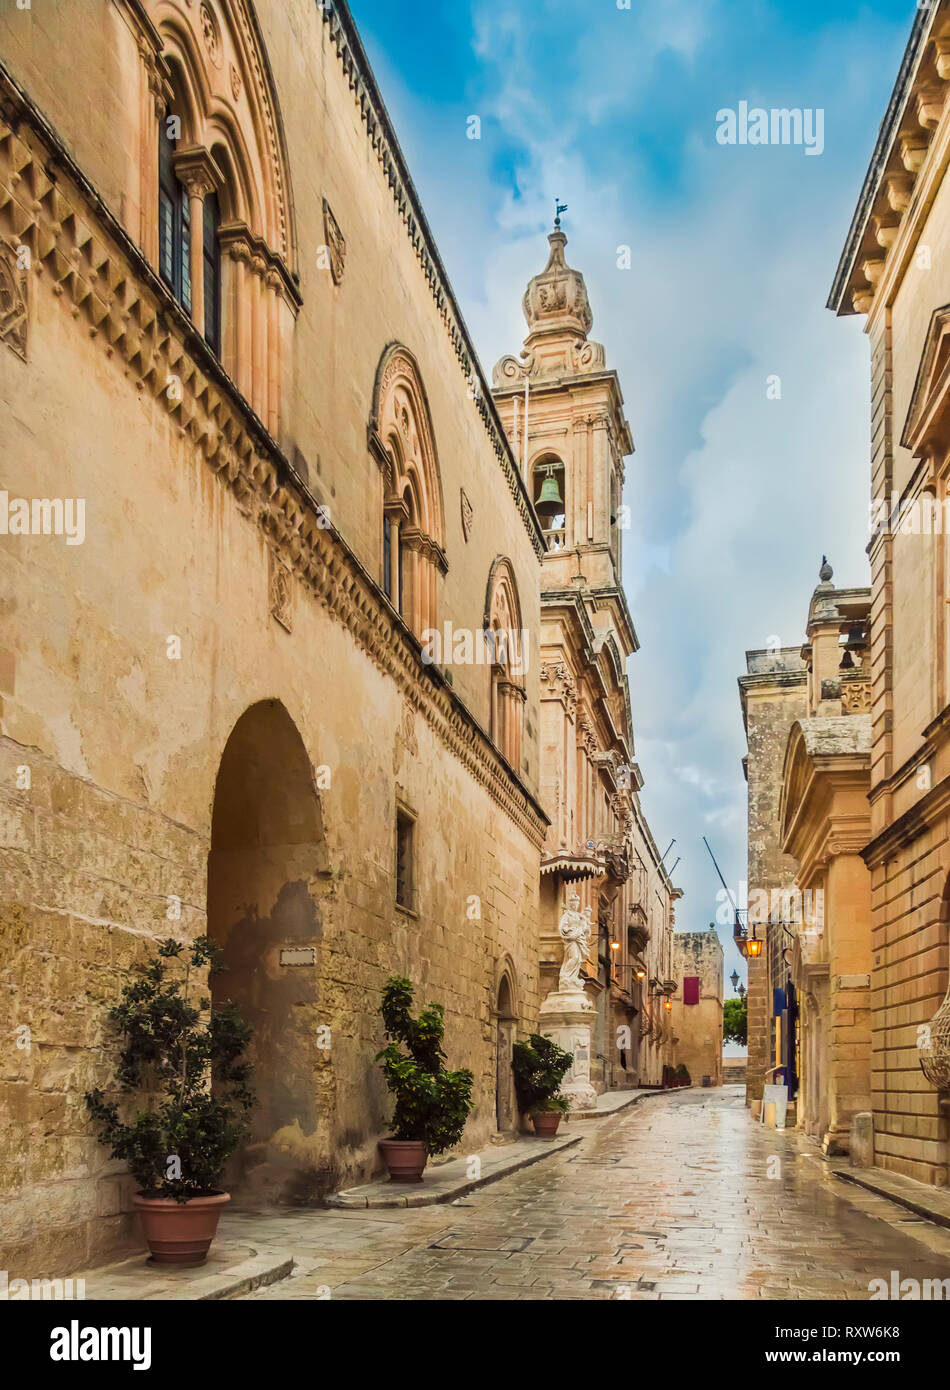 Mdina, Malta: Church of the Annunciation of Our Lady in narrow sett street of medieval town with lantern lights. Medieval Maltese architecture Stock Photo